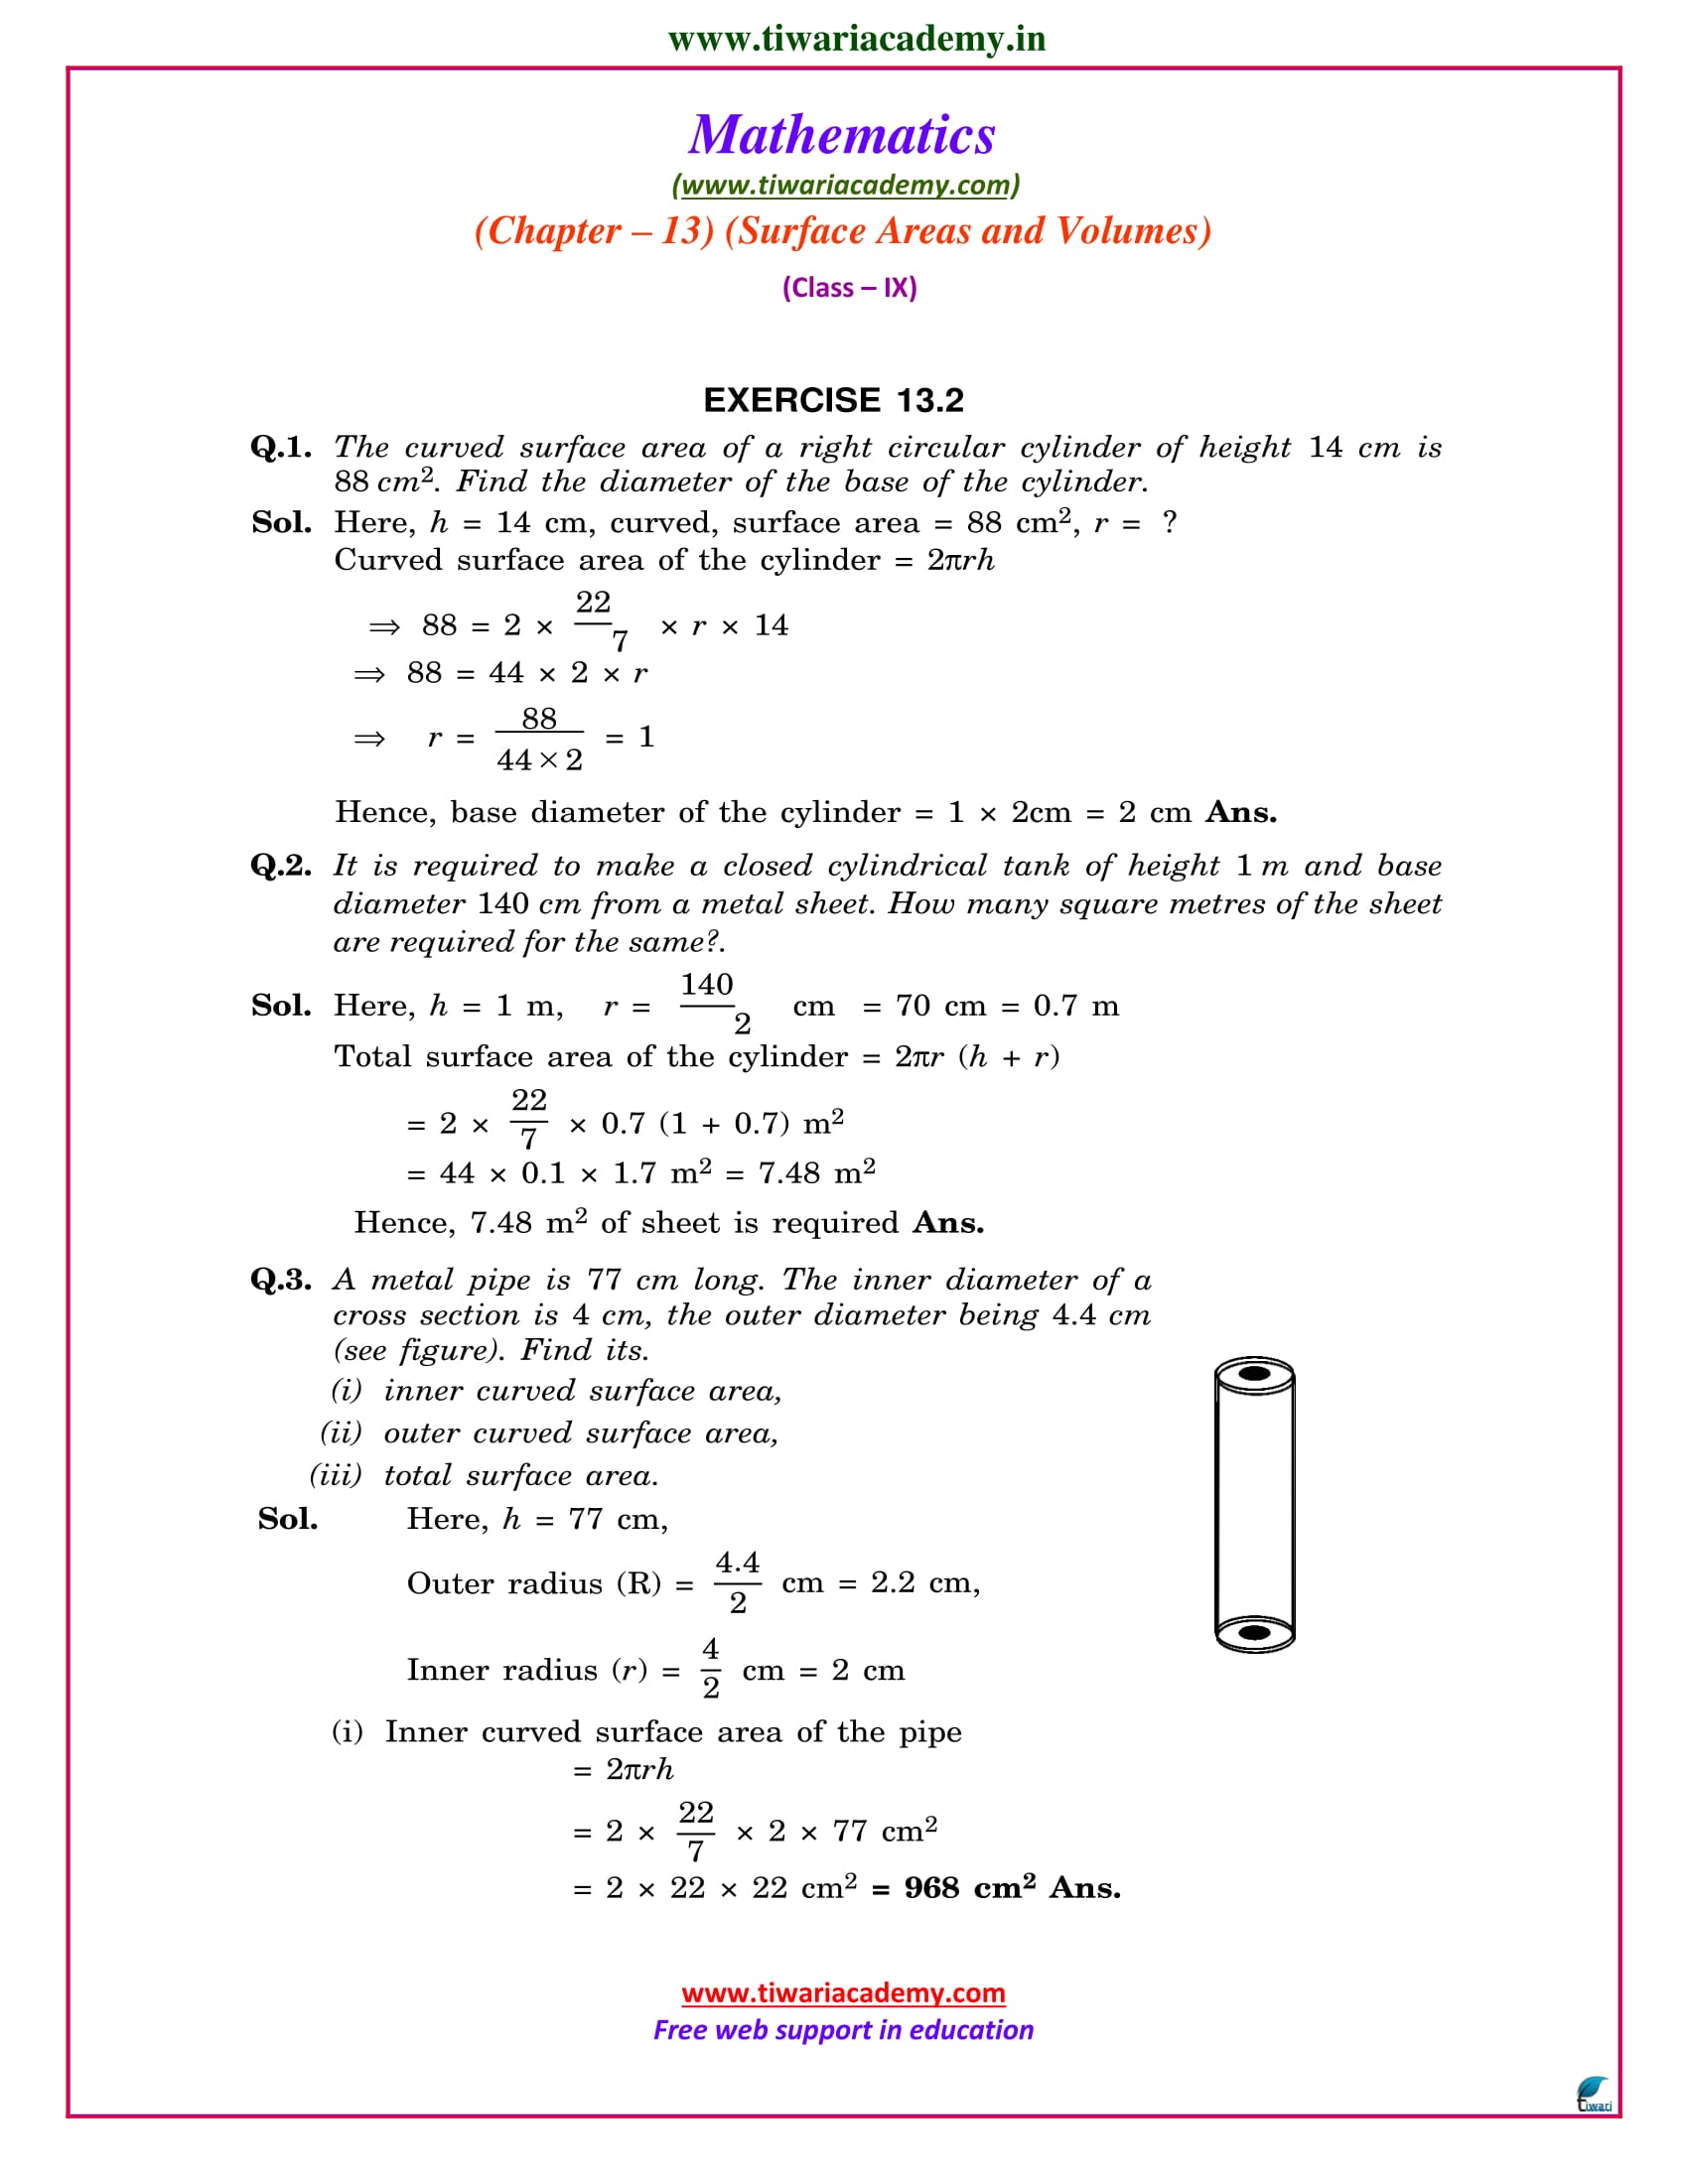 NCERT Solutions for Class 9 Maths Chapter 13 Exercise 13.2